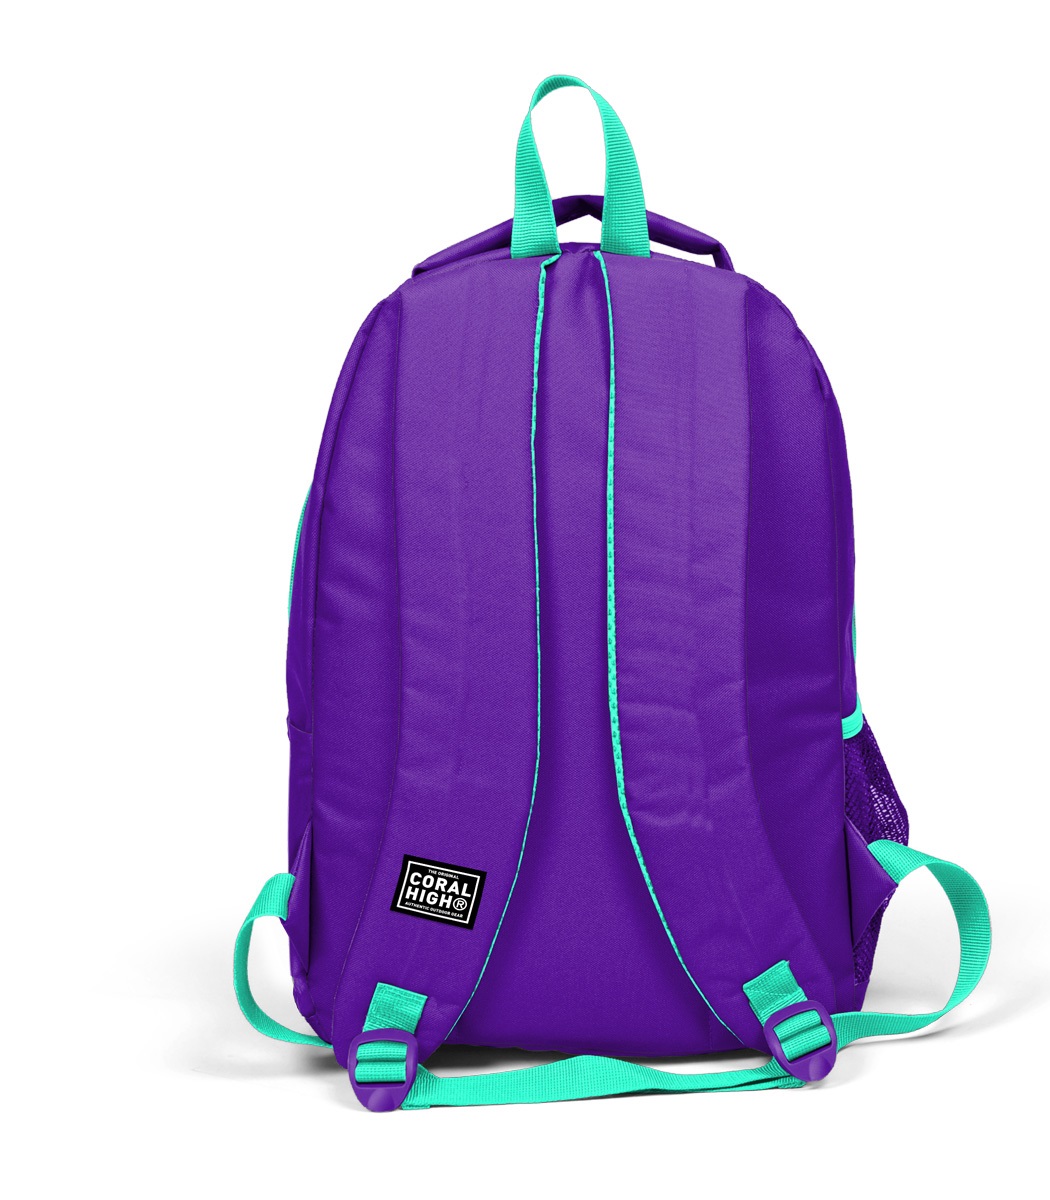 Coral High Kids Three Compartment USB School Backpack - Purple Water Green Unicorn Patterned